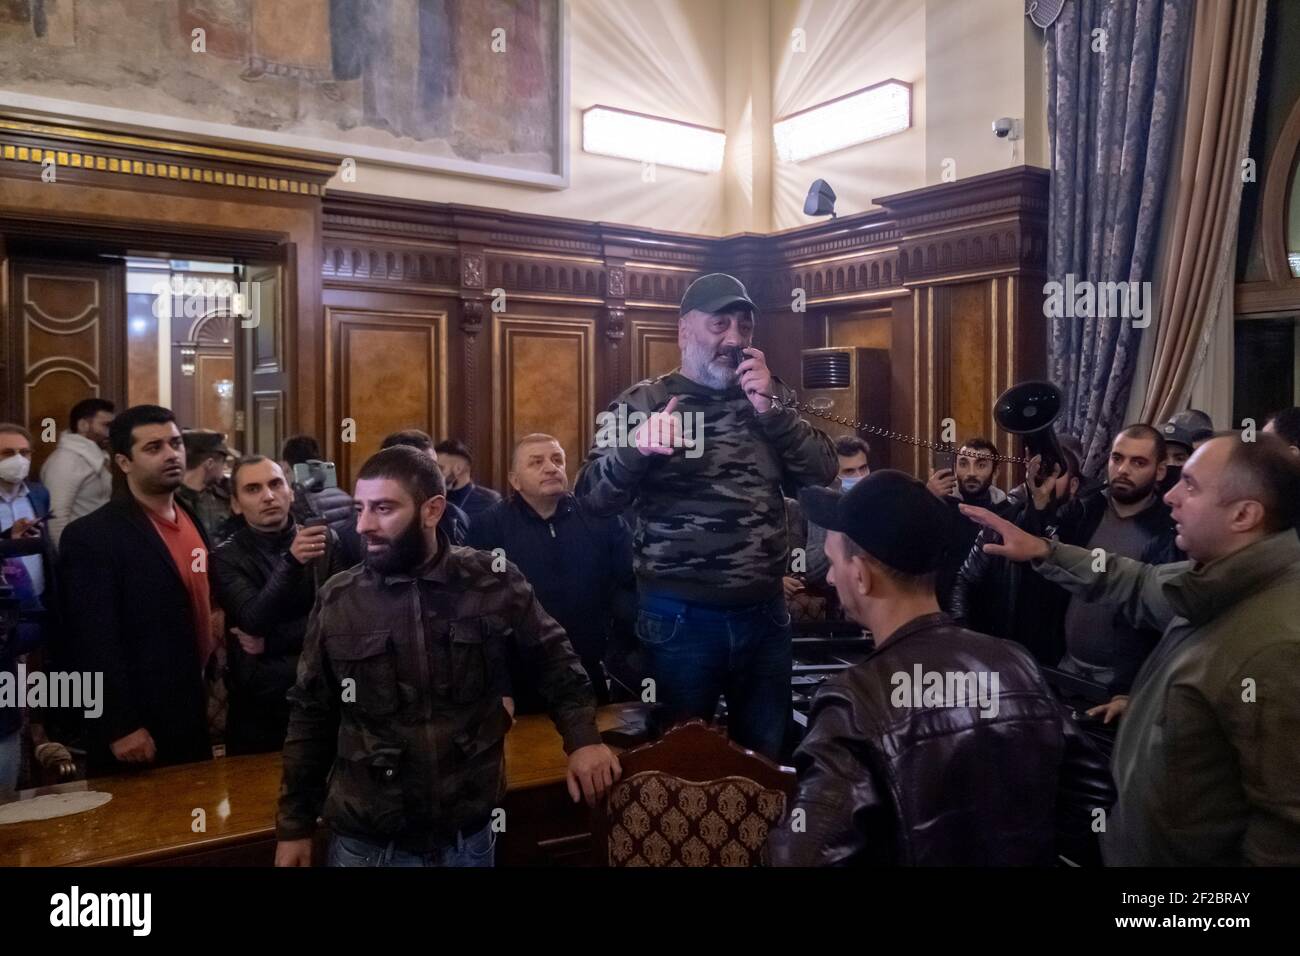 YEREVAN, ARMENIA - NOVEMBER 10: Armenians storm into the building housing the official residence of the Armenian prime minister soon after a peace deal was signed between their country, Azerbaijan and Russia on November 10 2020 in central Yerevan. Armenia's prime minister Pashinyan, Russia's president Putin and Azerbaijan's president Aliyev signed an agreement to end the war in Nagorno Karabakh known also as the Artsakh Republic which re-erupted in late September into a six-week war that left thousands dead. Stock Photo